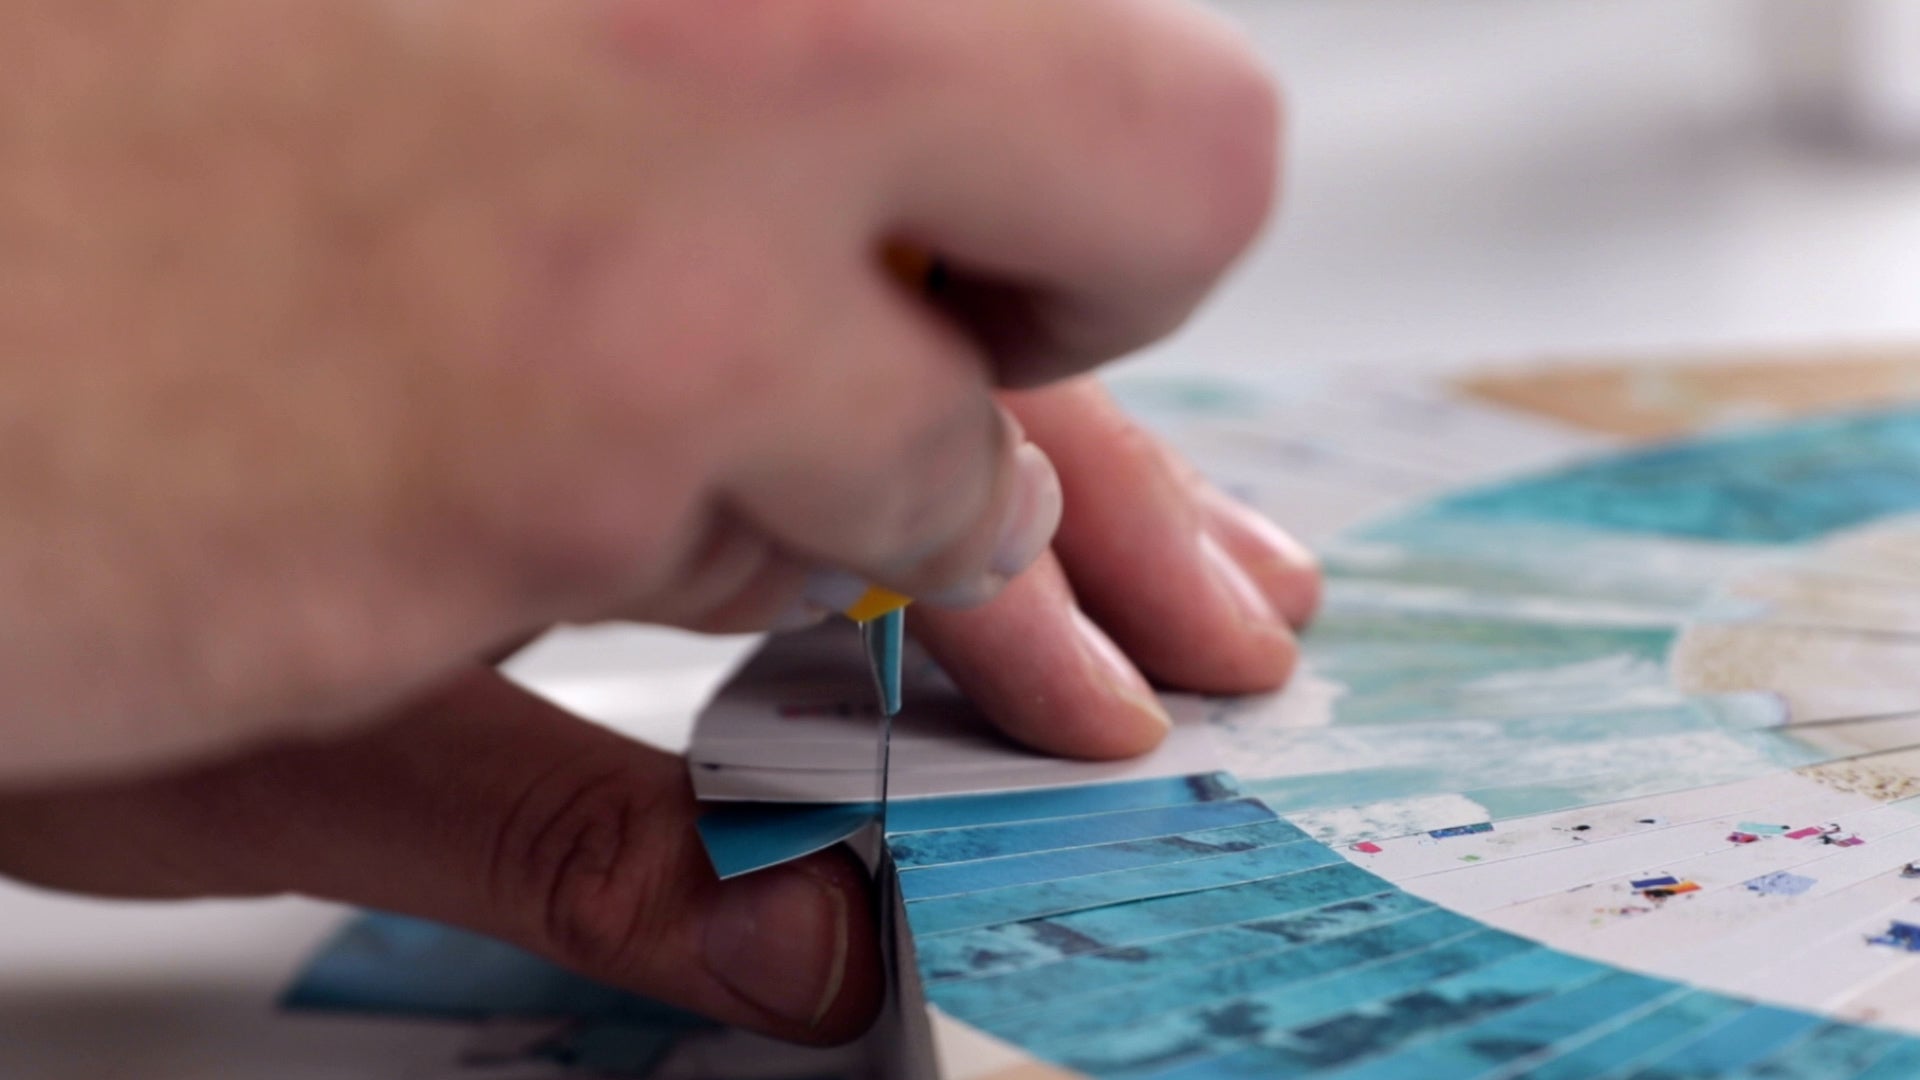 how to resin paper collage art: use your thumb as a guide to keep the blade flush against the side of the panel